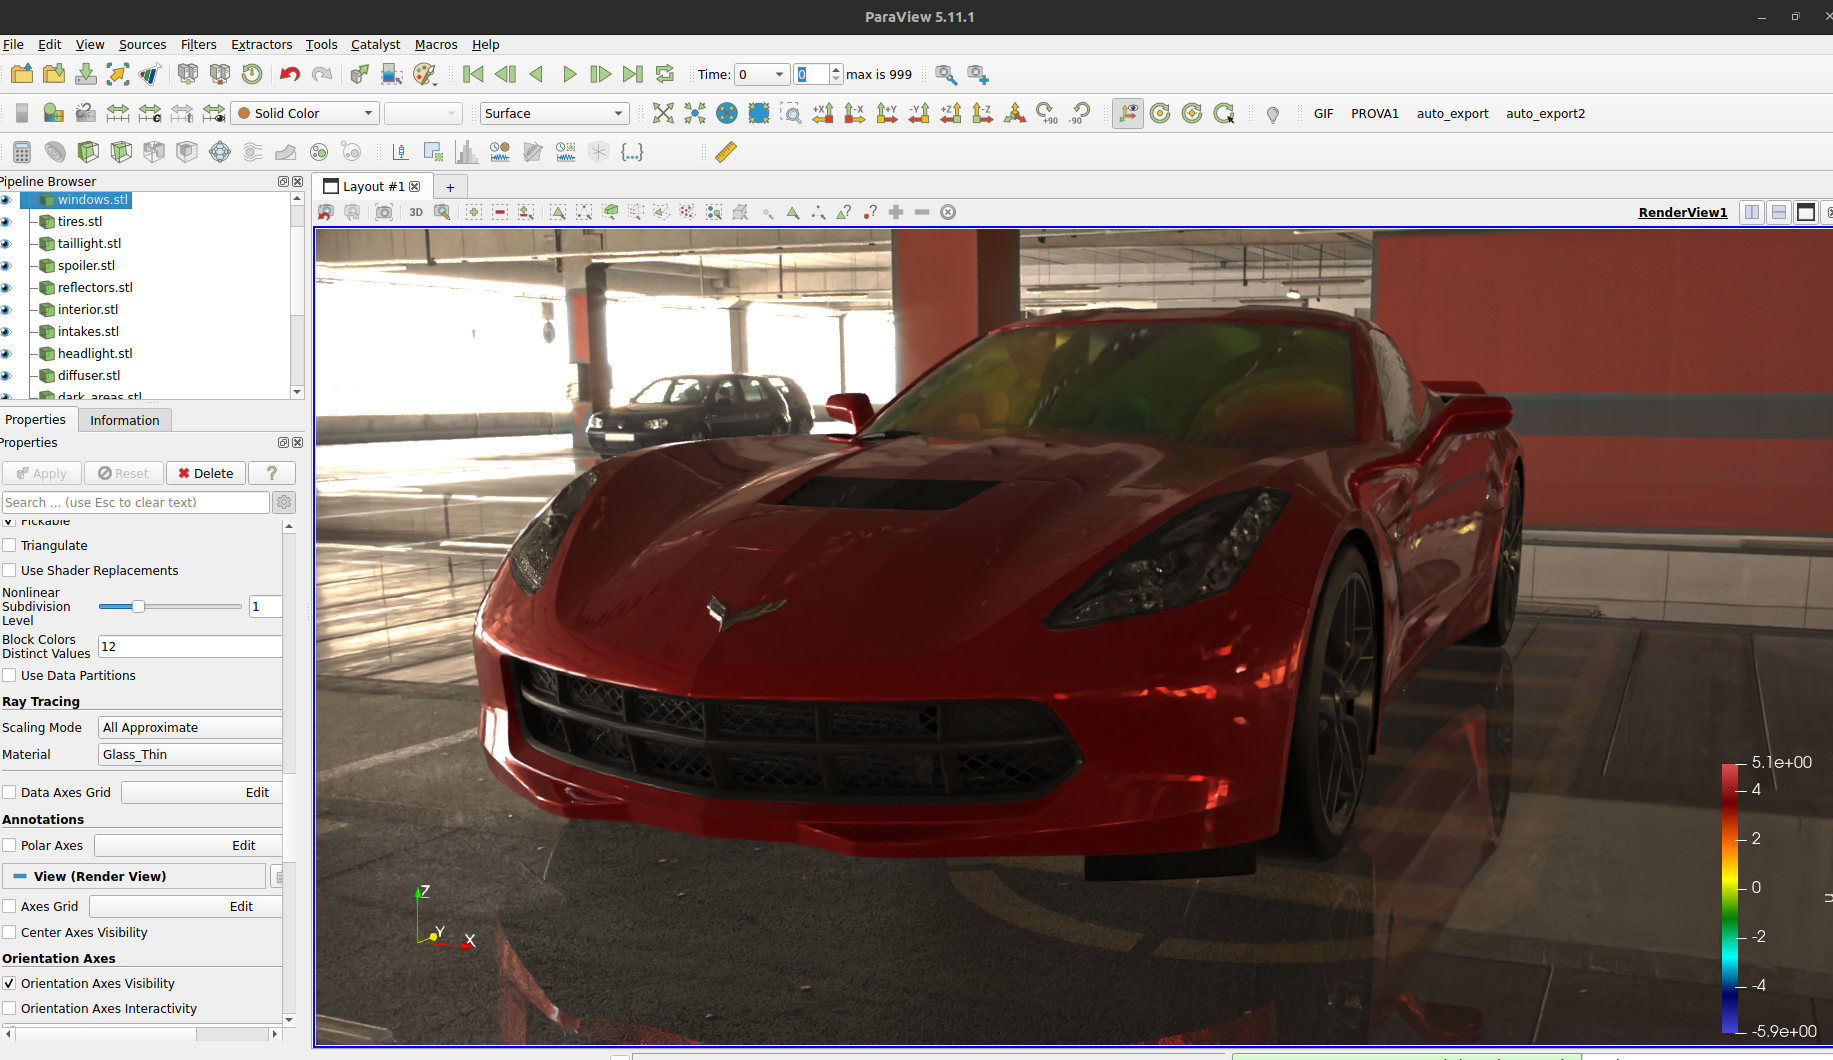 Automotive Acoustic Simulation Post-processing with ParaView